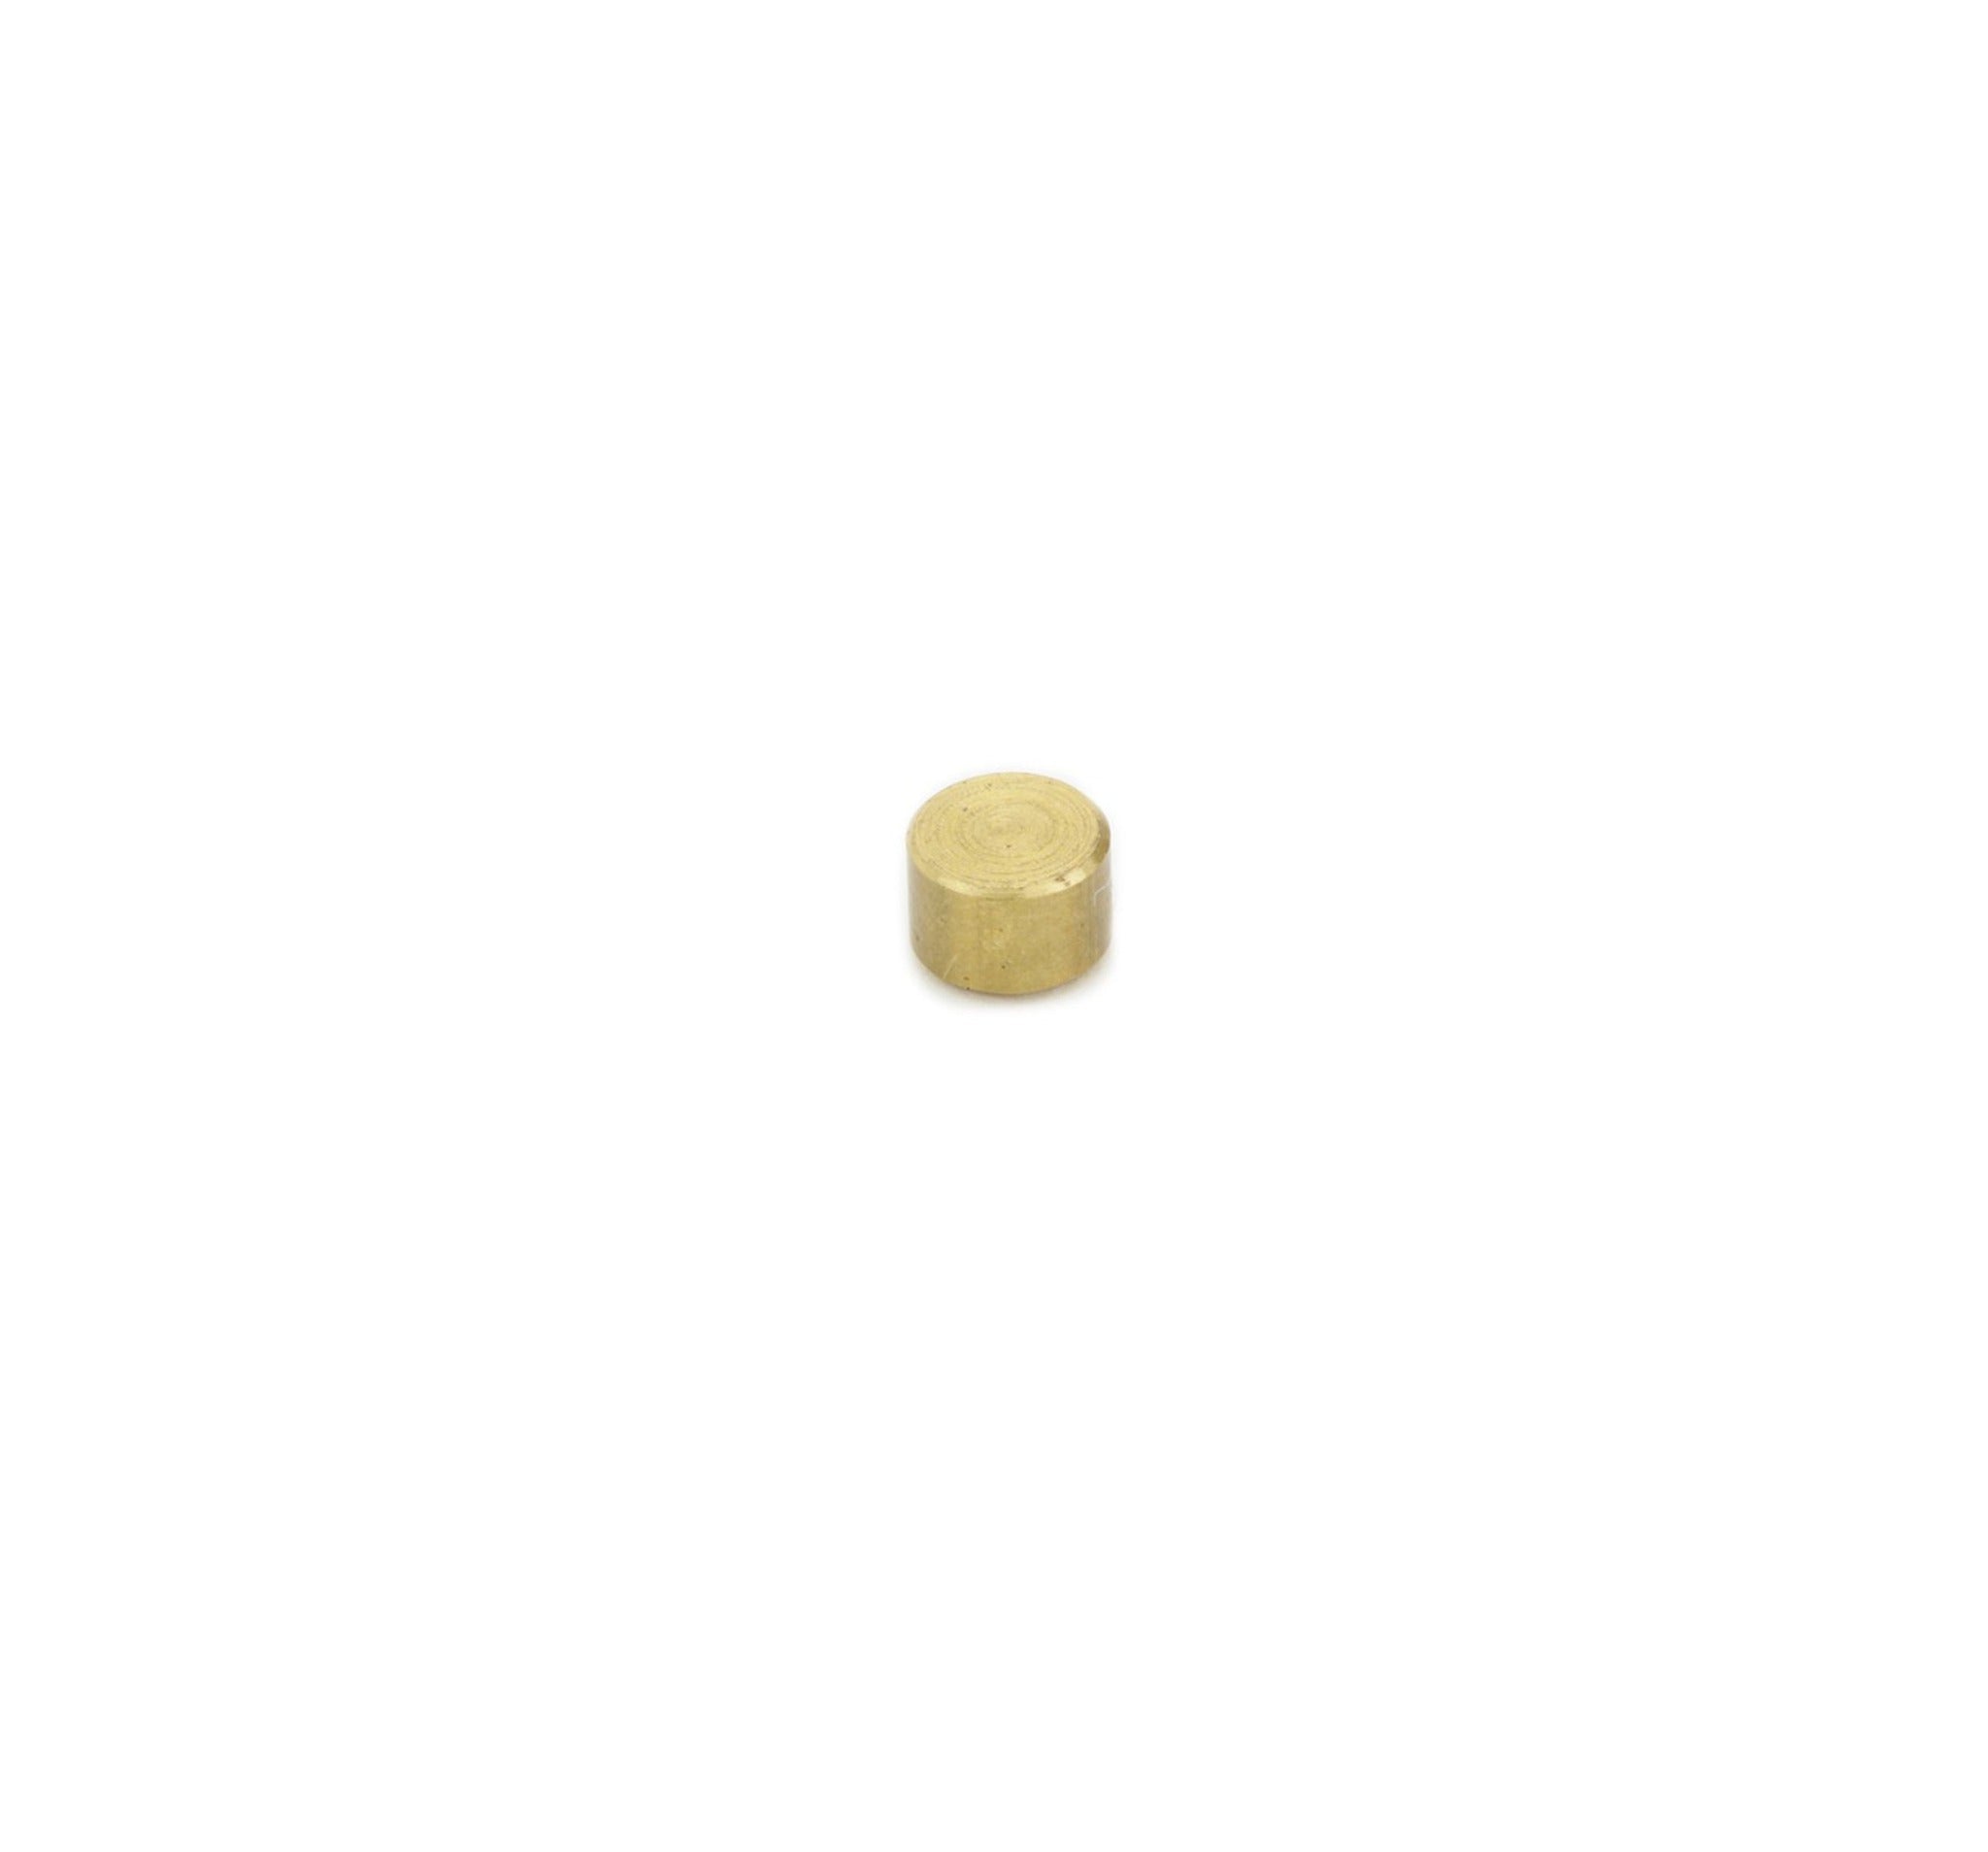 Ammco 3141 3/16" Brass Plug Replacement (Pack of 10)